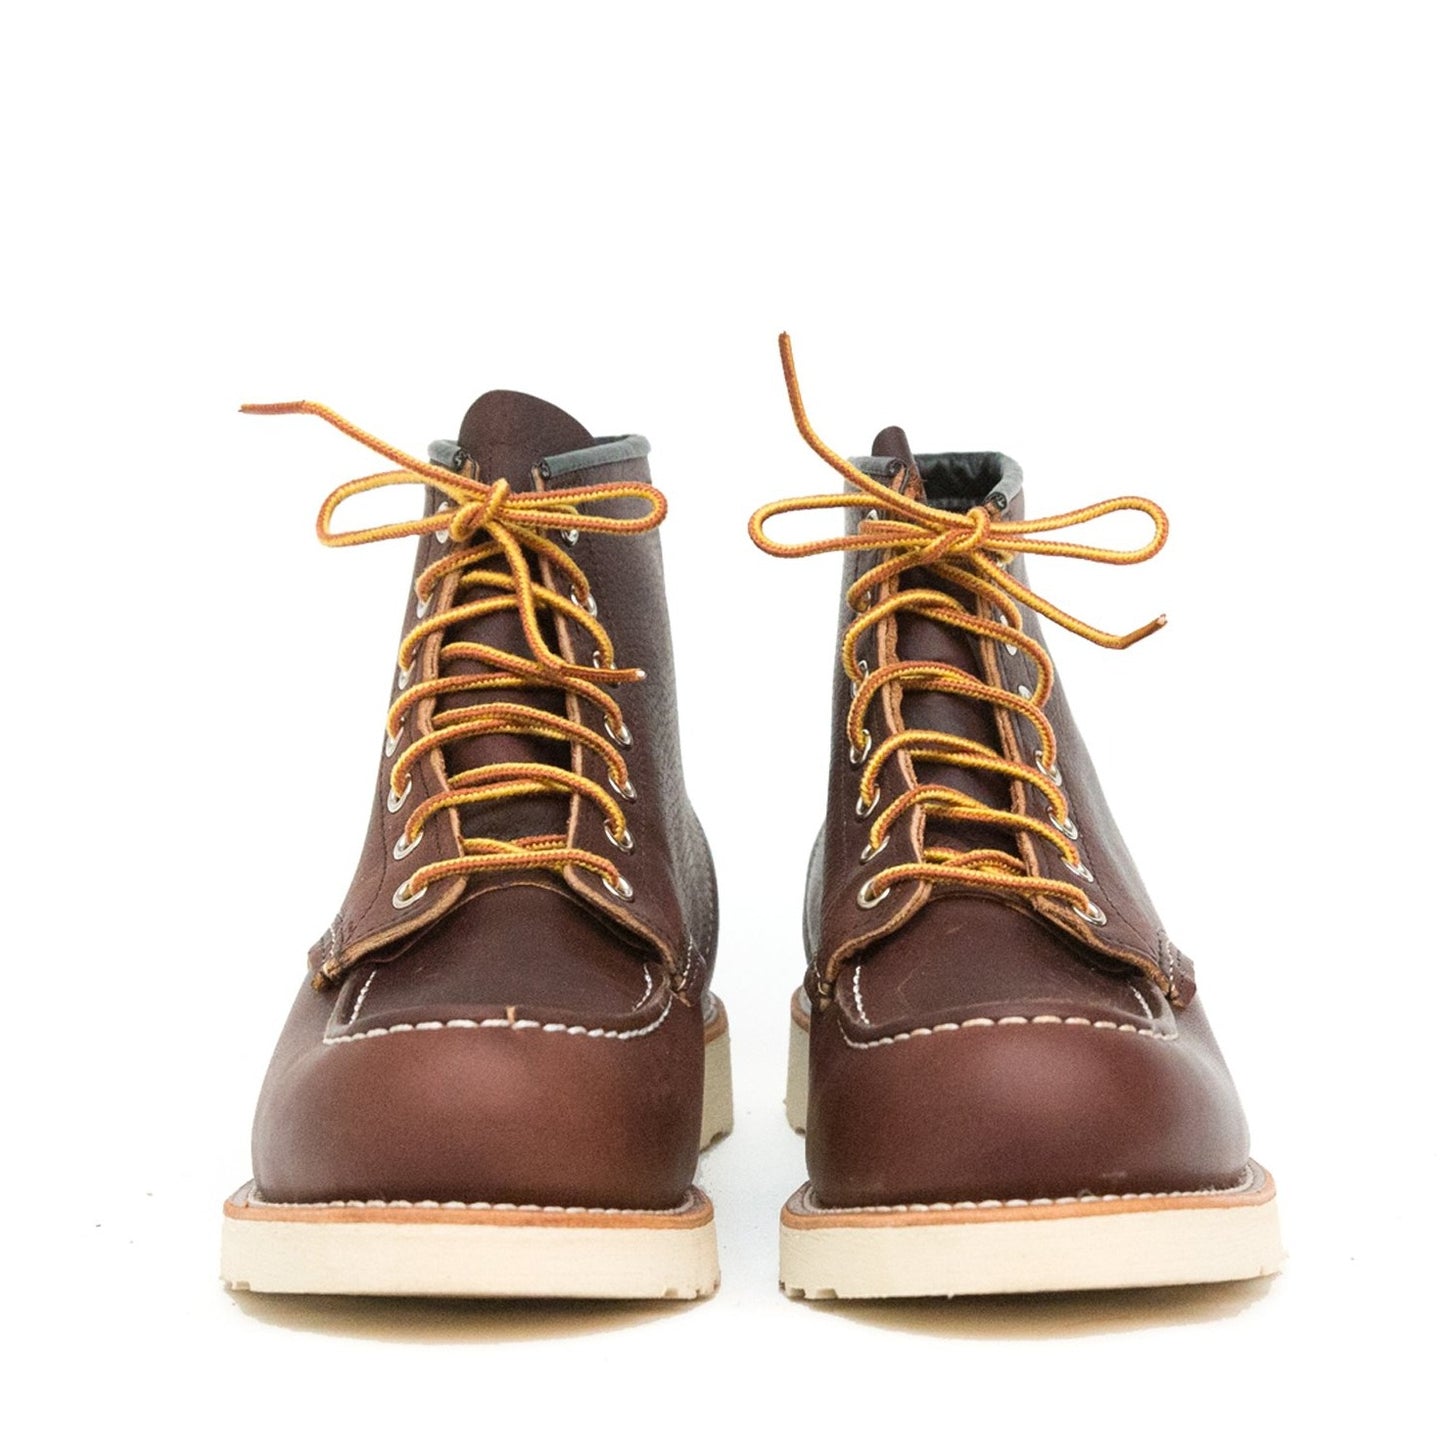 RED WING - 8138 Classic Moc Toe